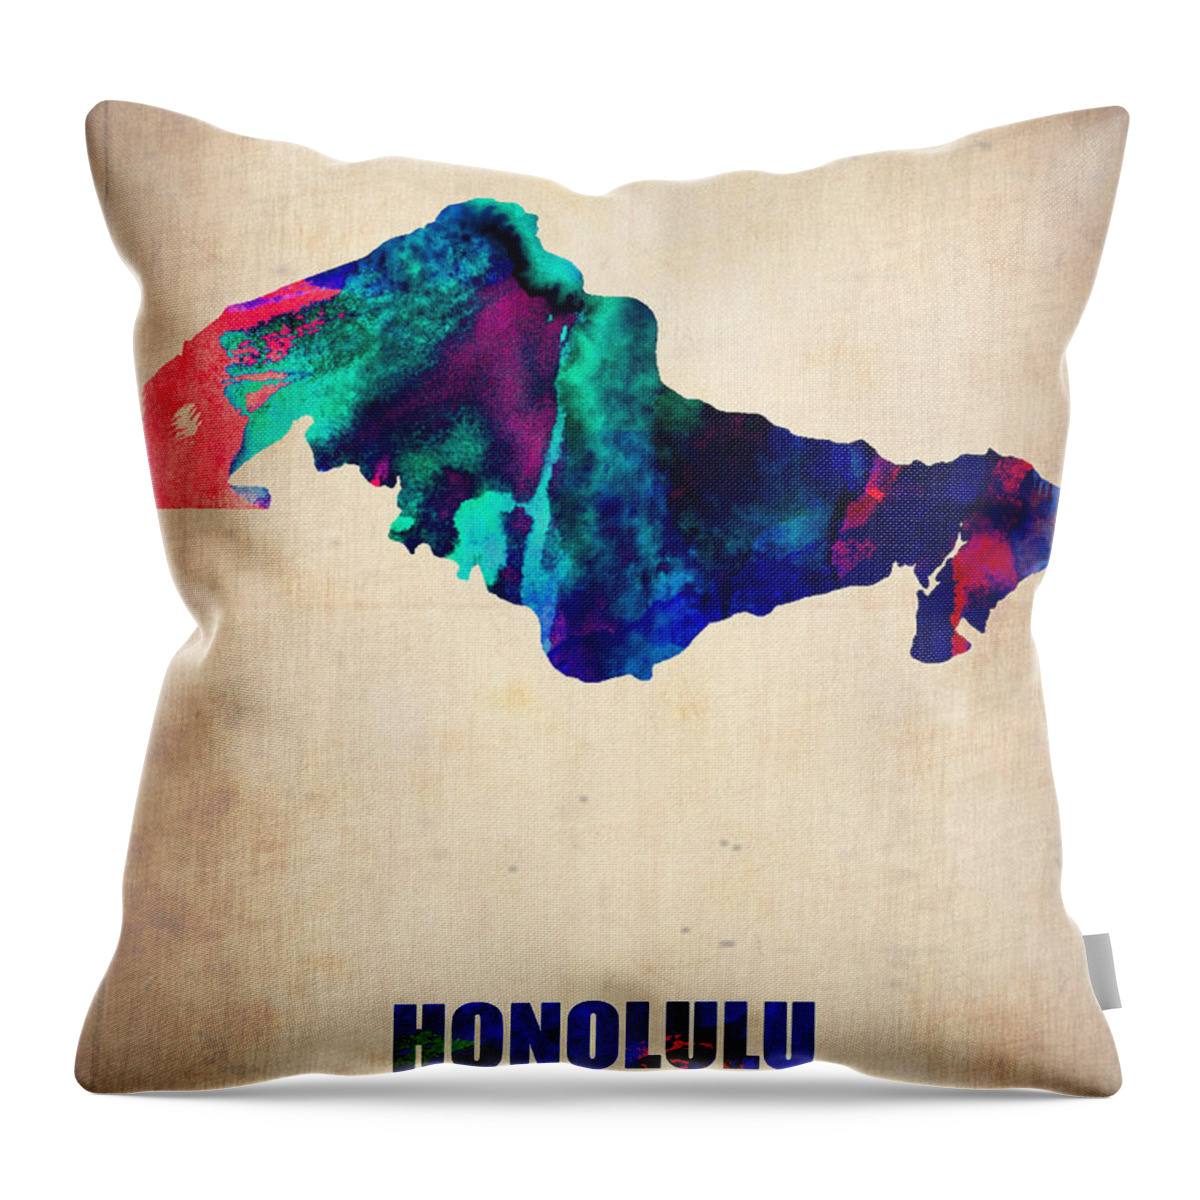 Honolulu Throw Pillow featuring the painting Honolulu Watercolor Map by Naxart Studio